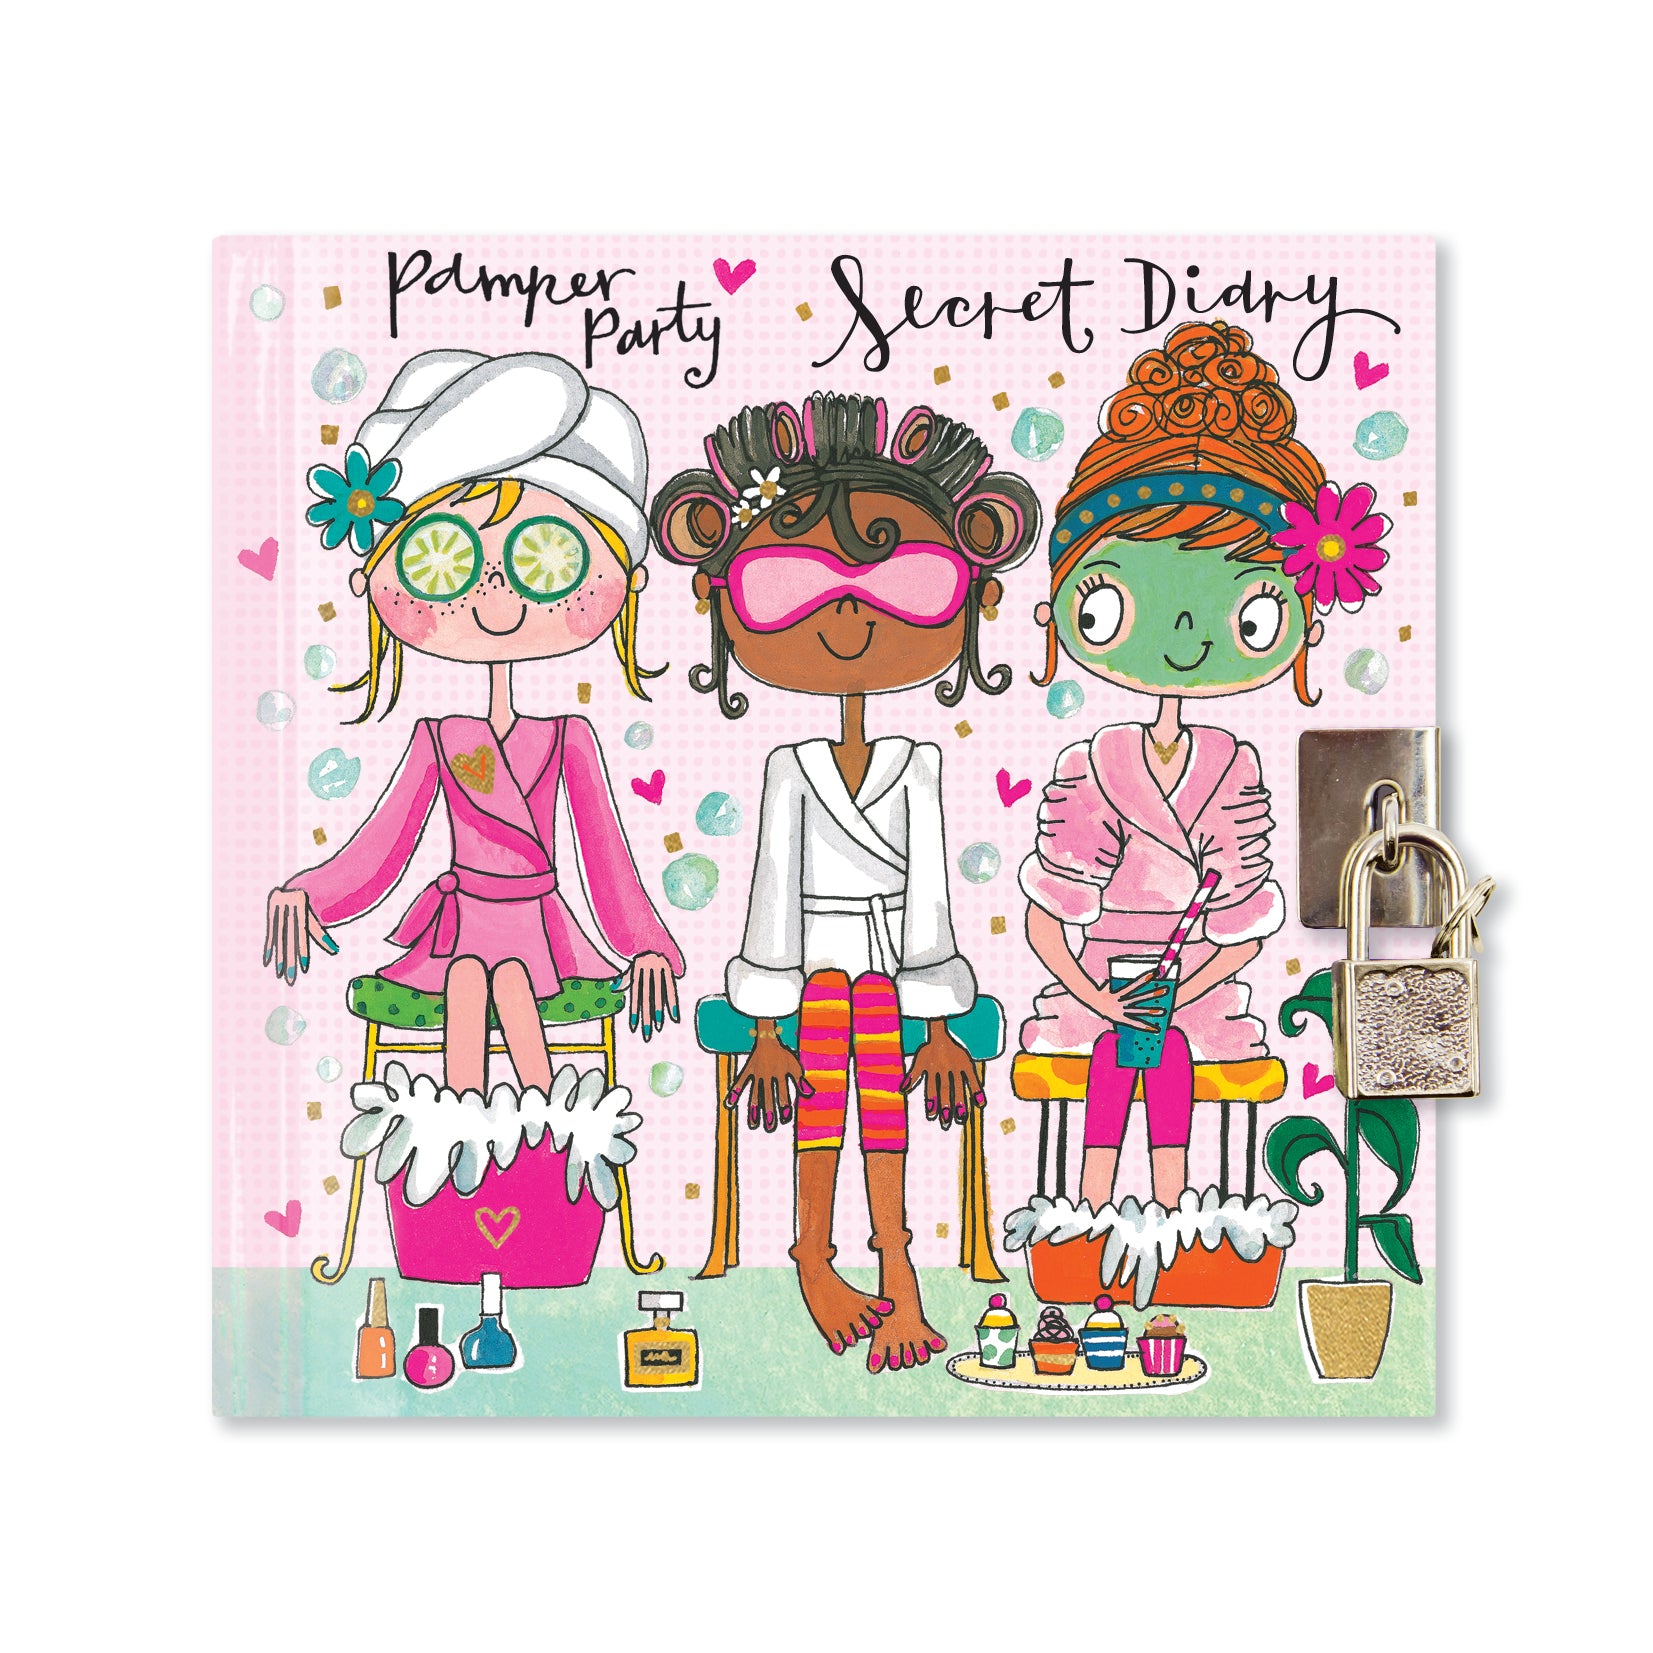 Pamper Party Secret Diary